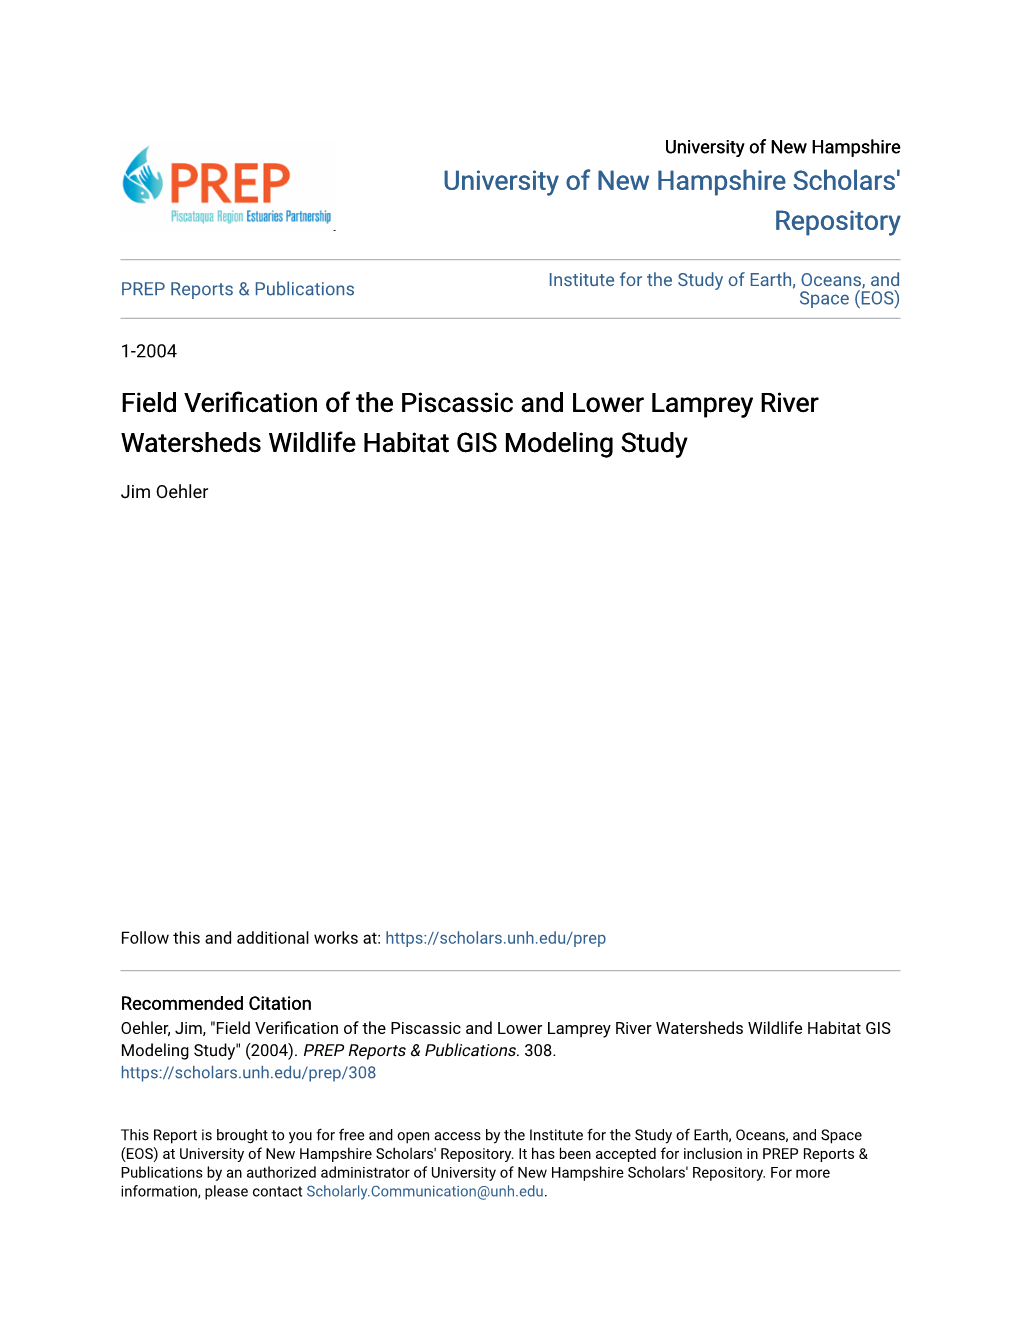 Field Verification of the Piscassic and Lower Lamprey River Watersheds Wildlife Habitat GIS Modeling Study